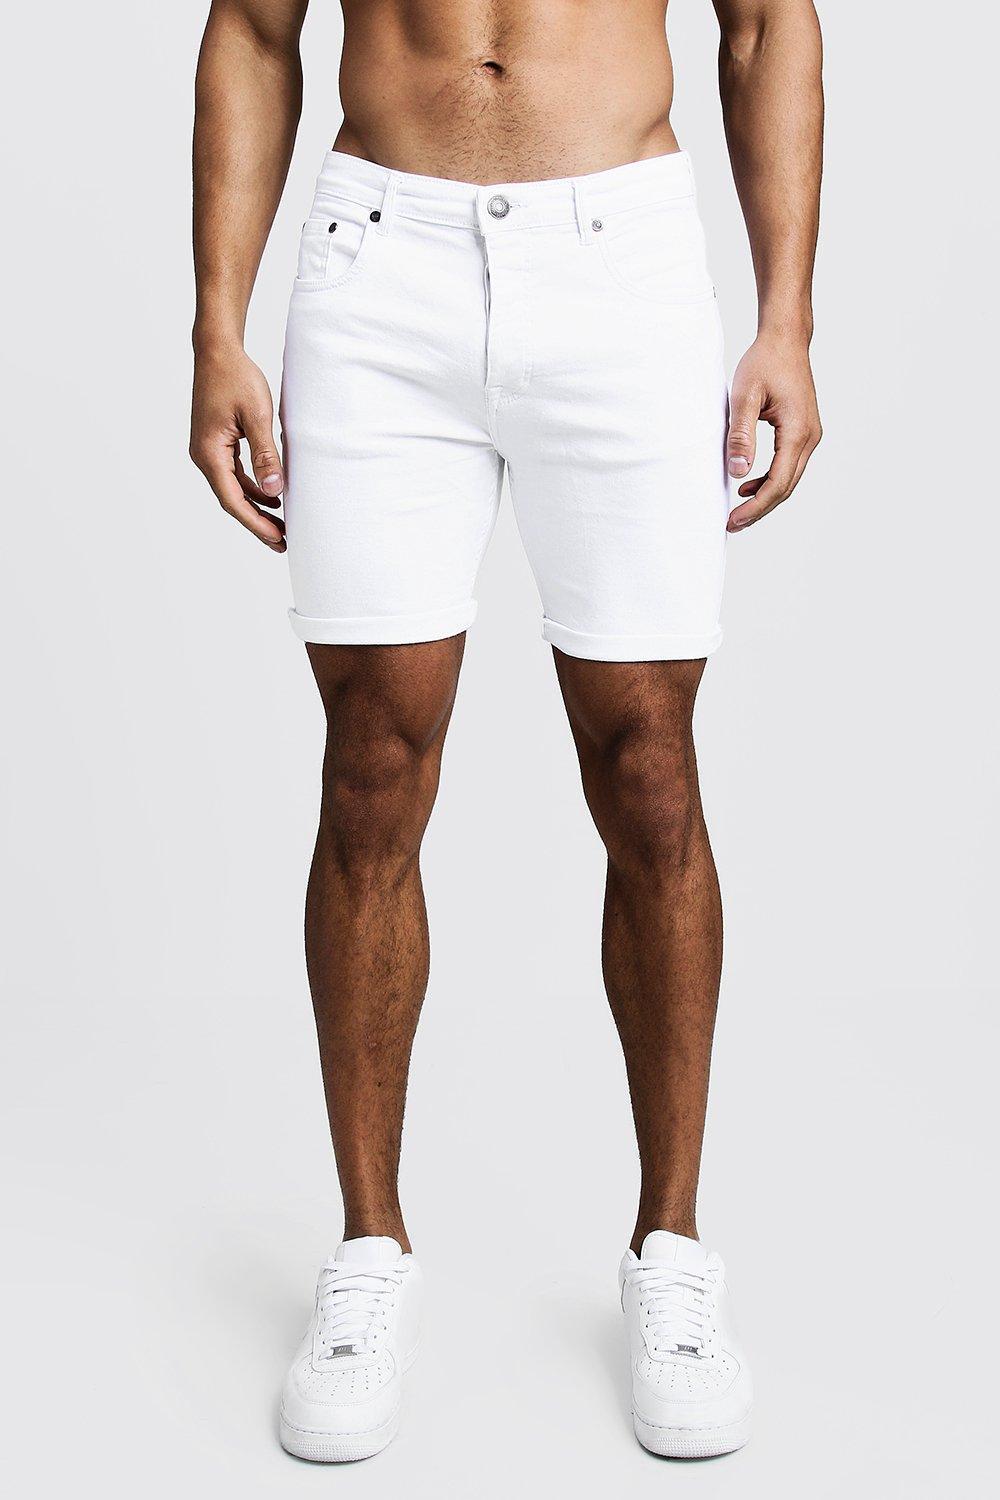 BoohooMAN 2 Pack Denim Shorts In Skinny Fit in White for Men - Lyst